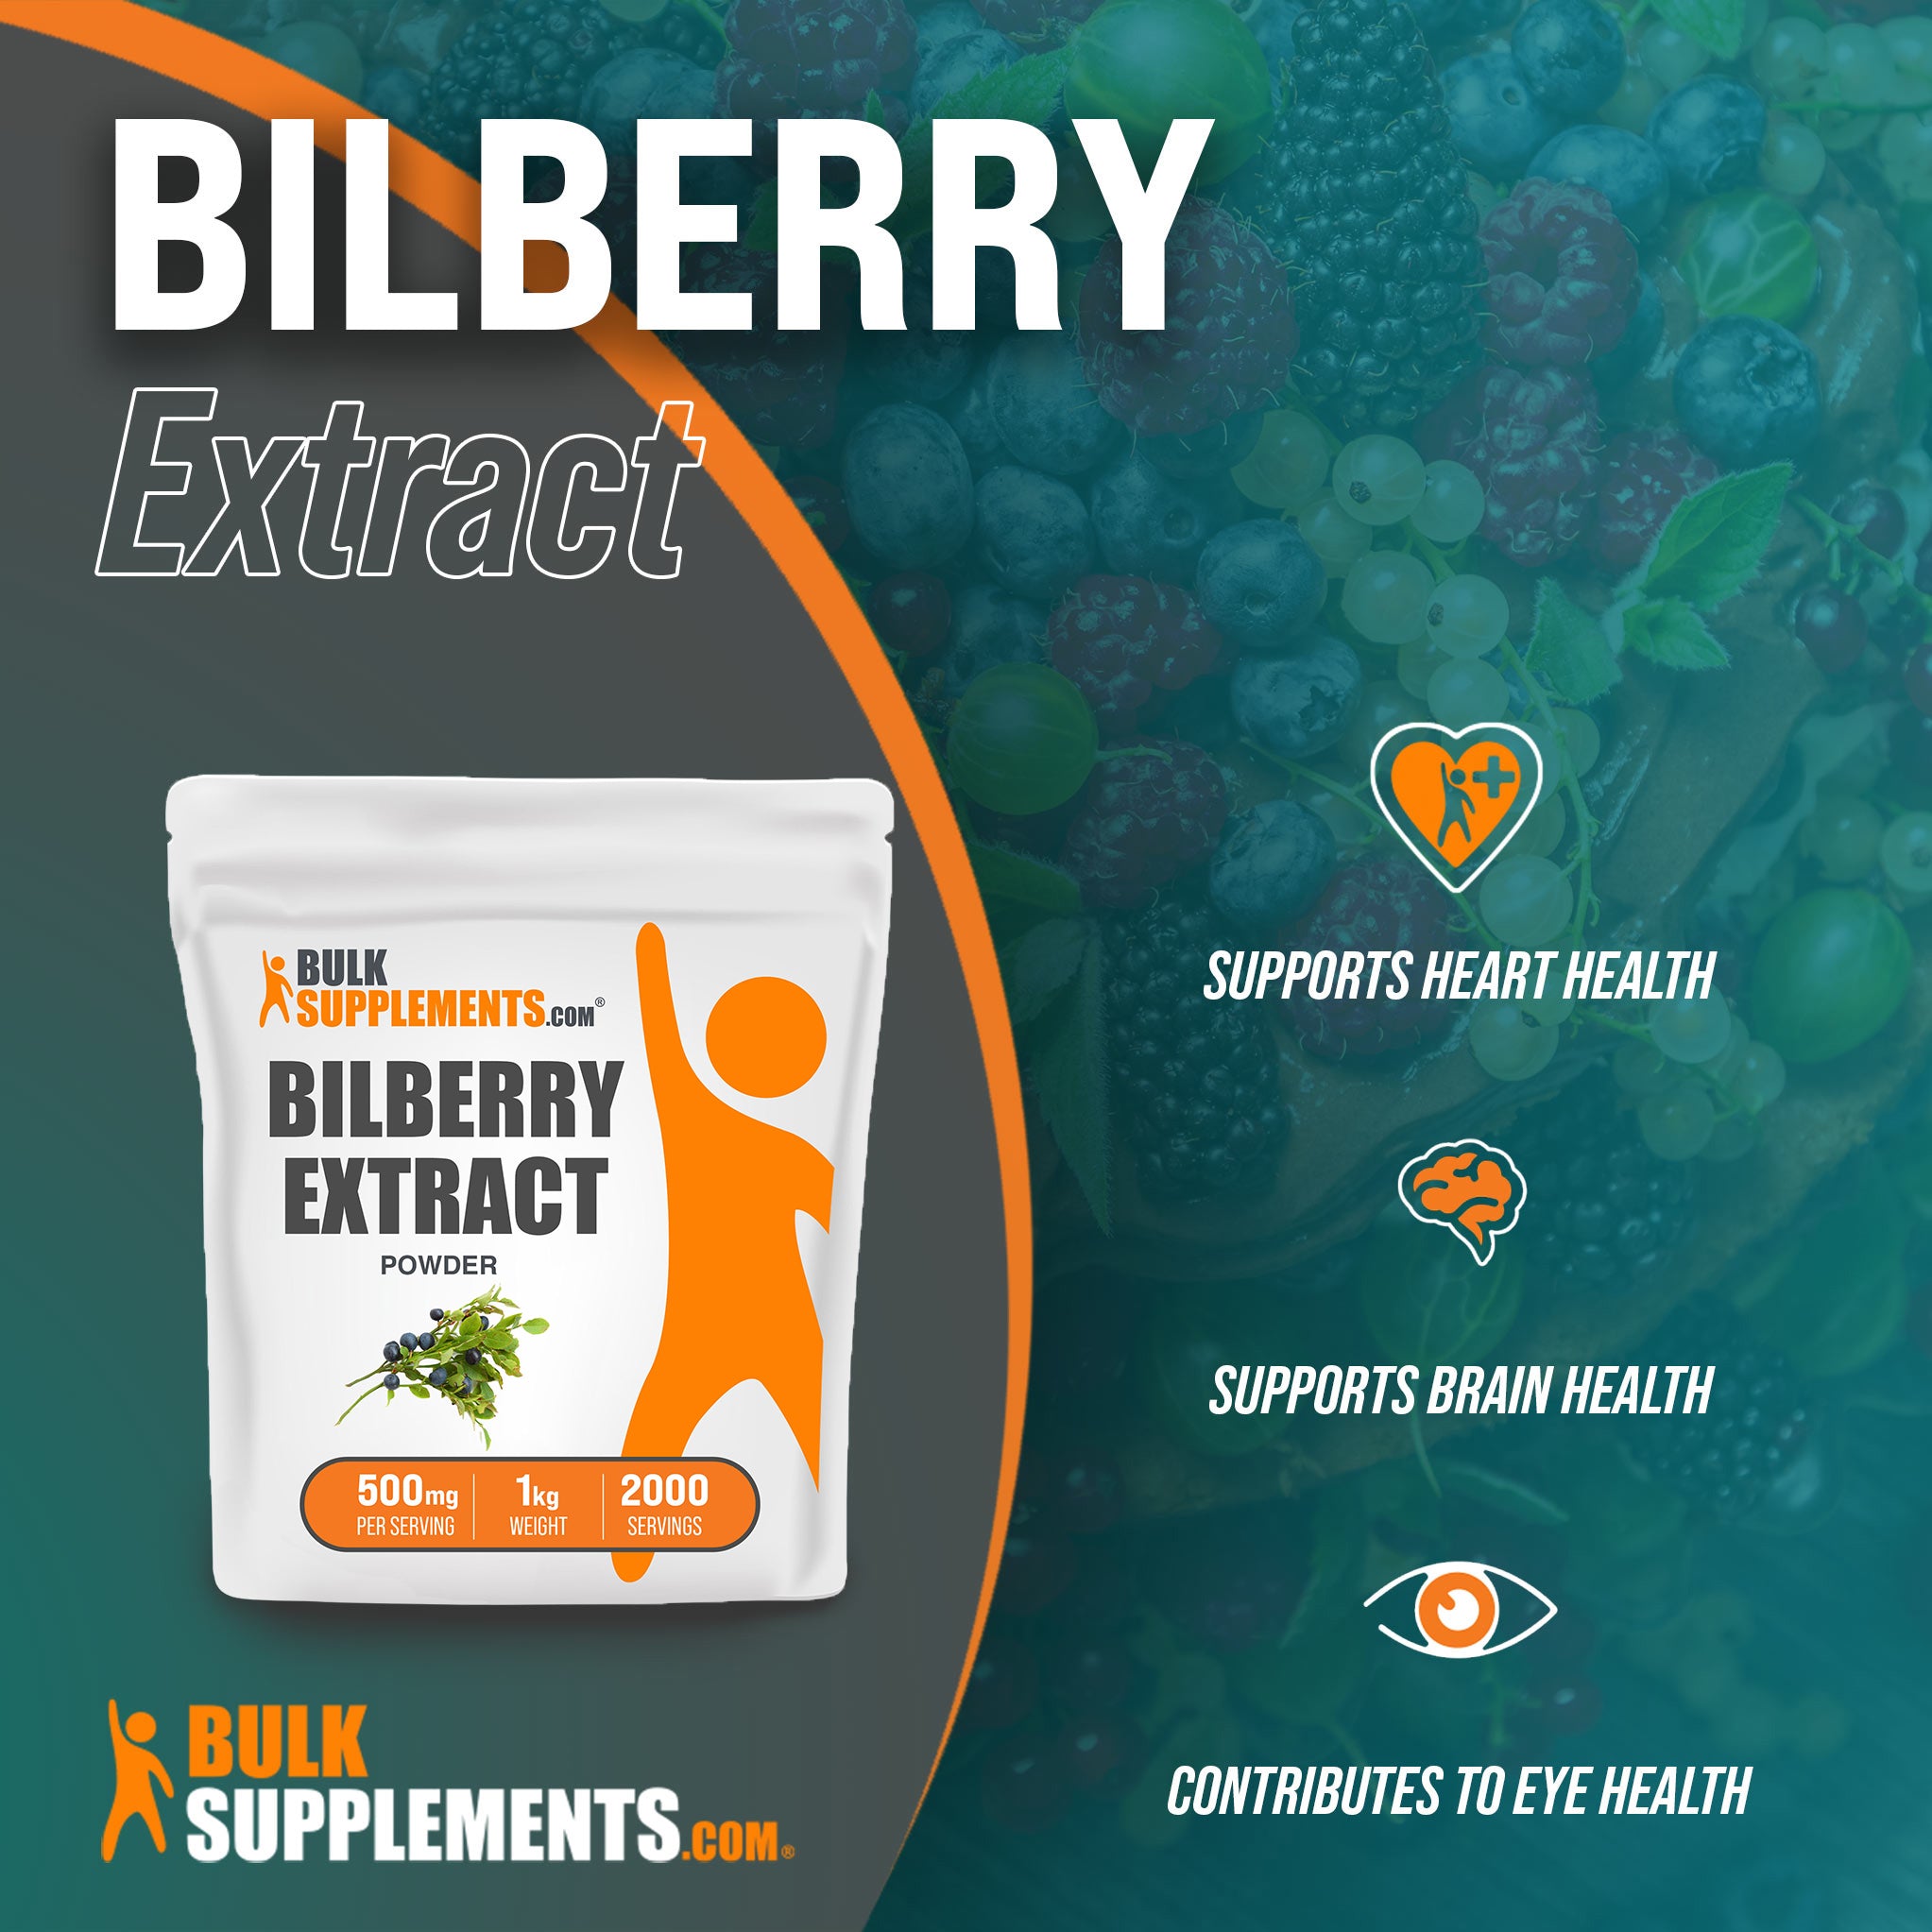 1kg Bilberry Extract is an ideal eye supplement